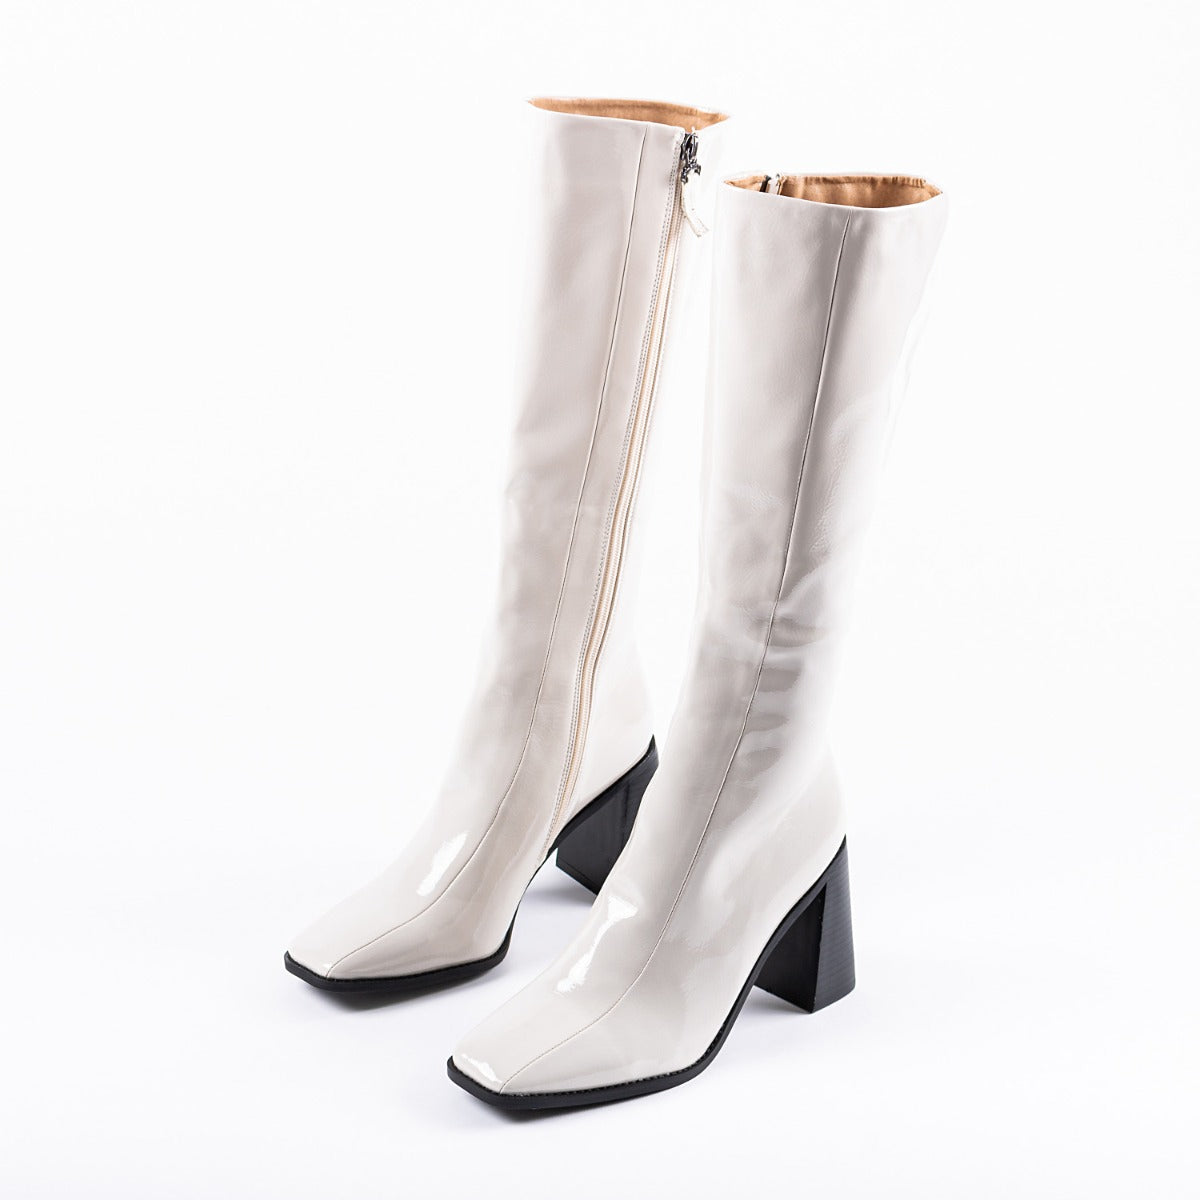 RAID Lenore Knee High Boot in Off White Crinkle Patent